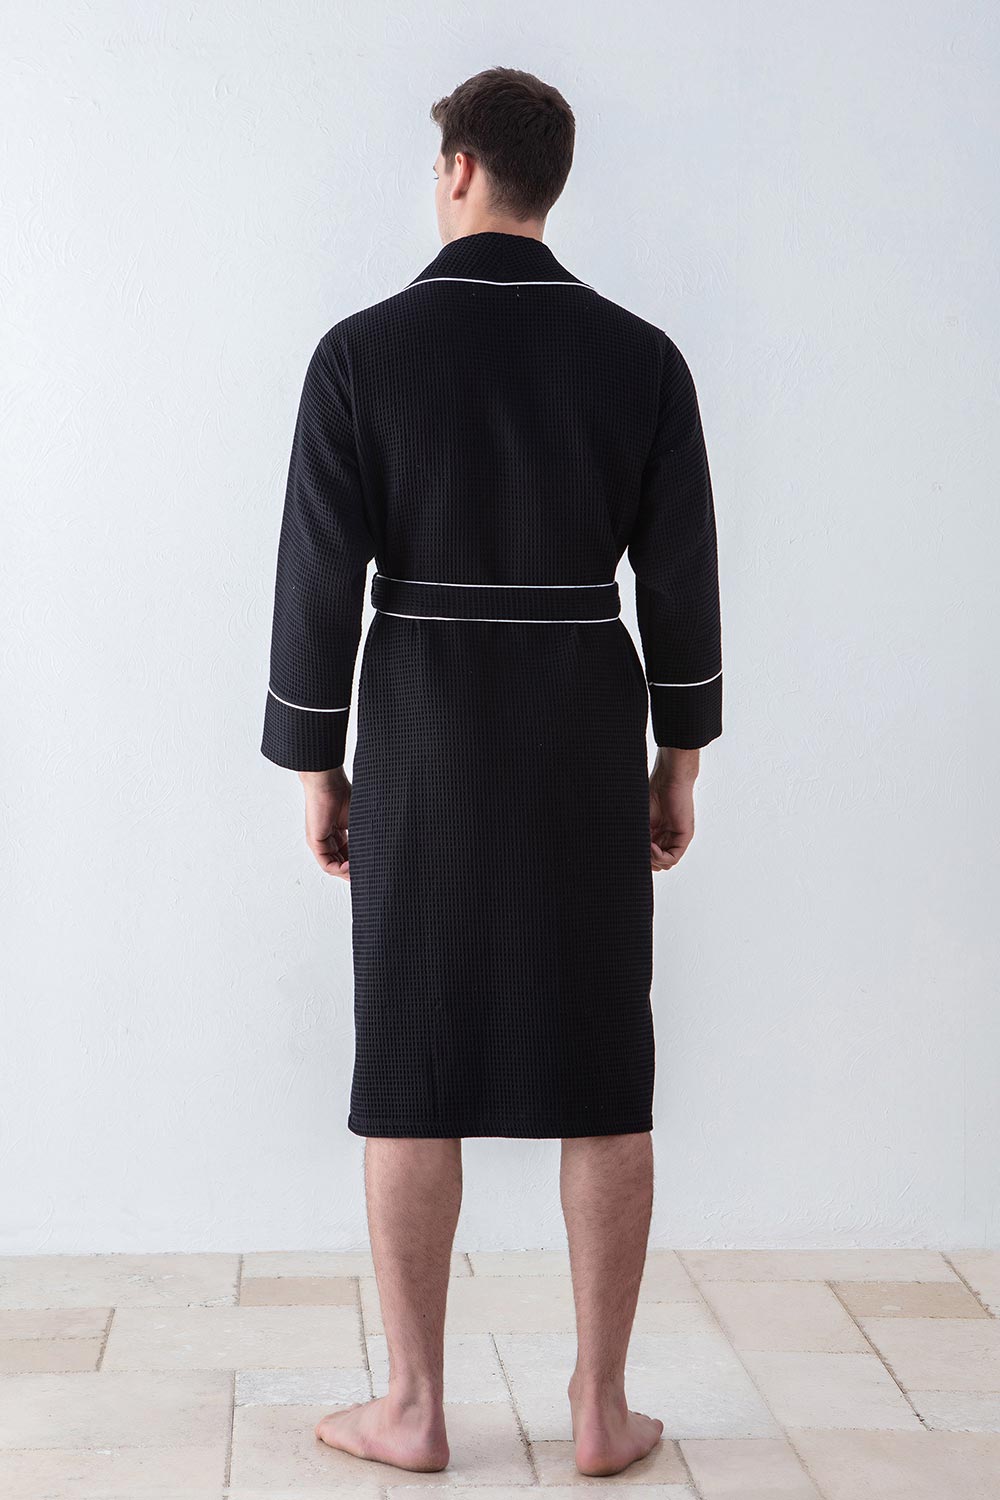 Picture of a Men's Luxury Waffle Knit Robe back in black